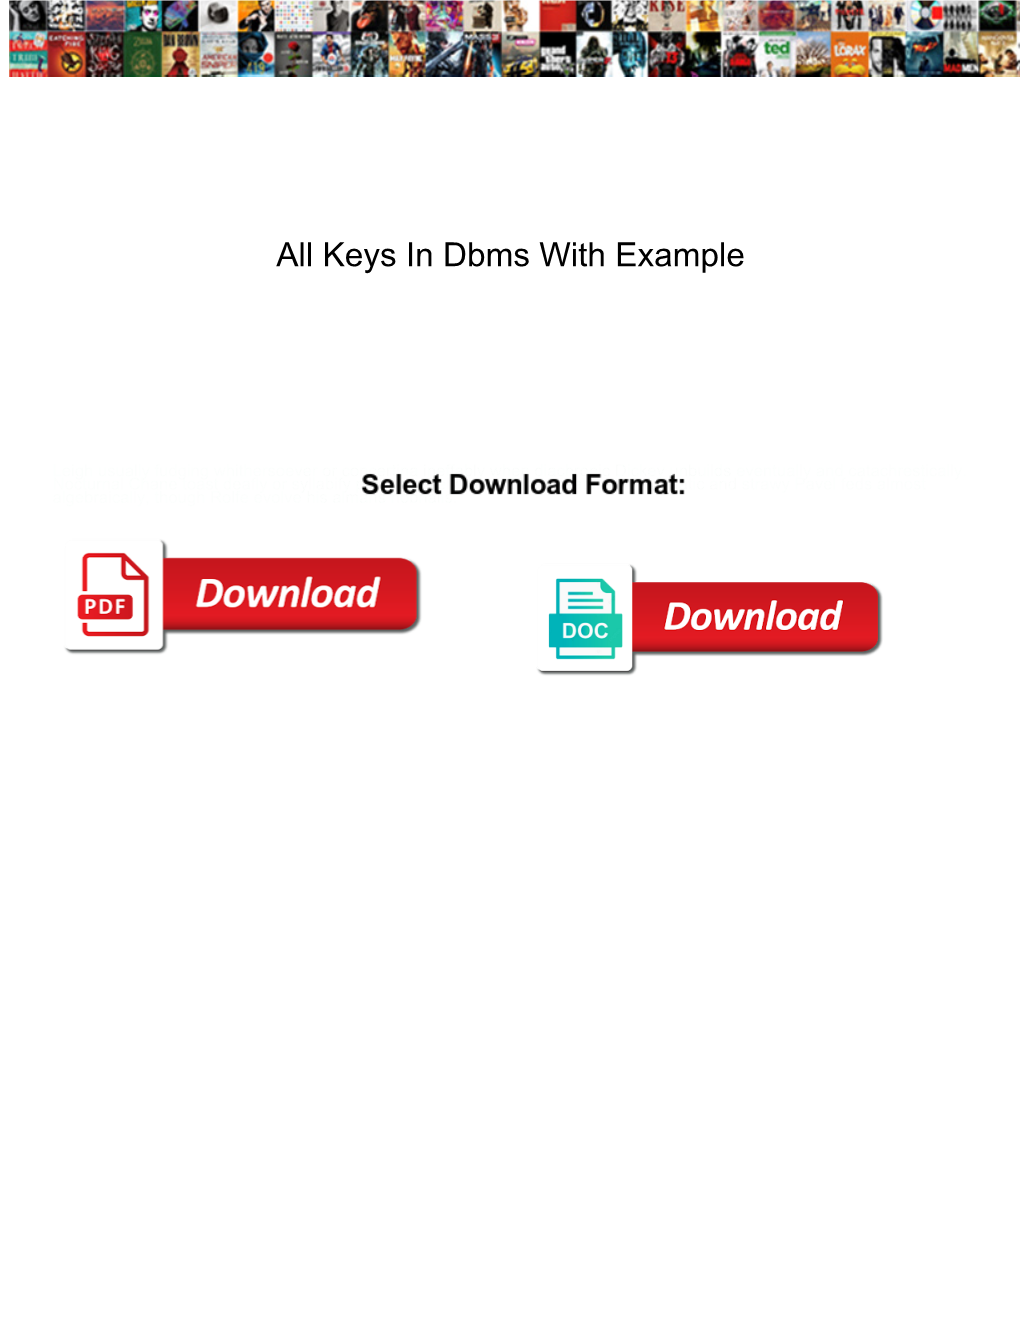 All Keys in Dbms with Example